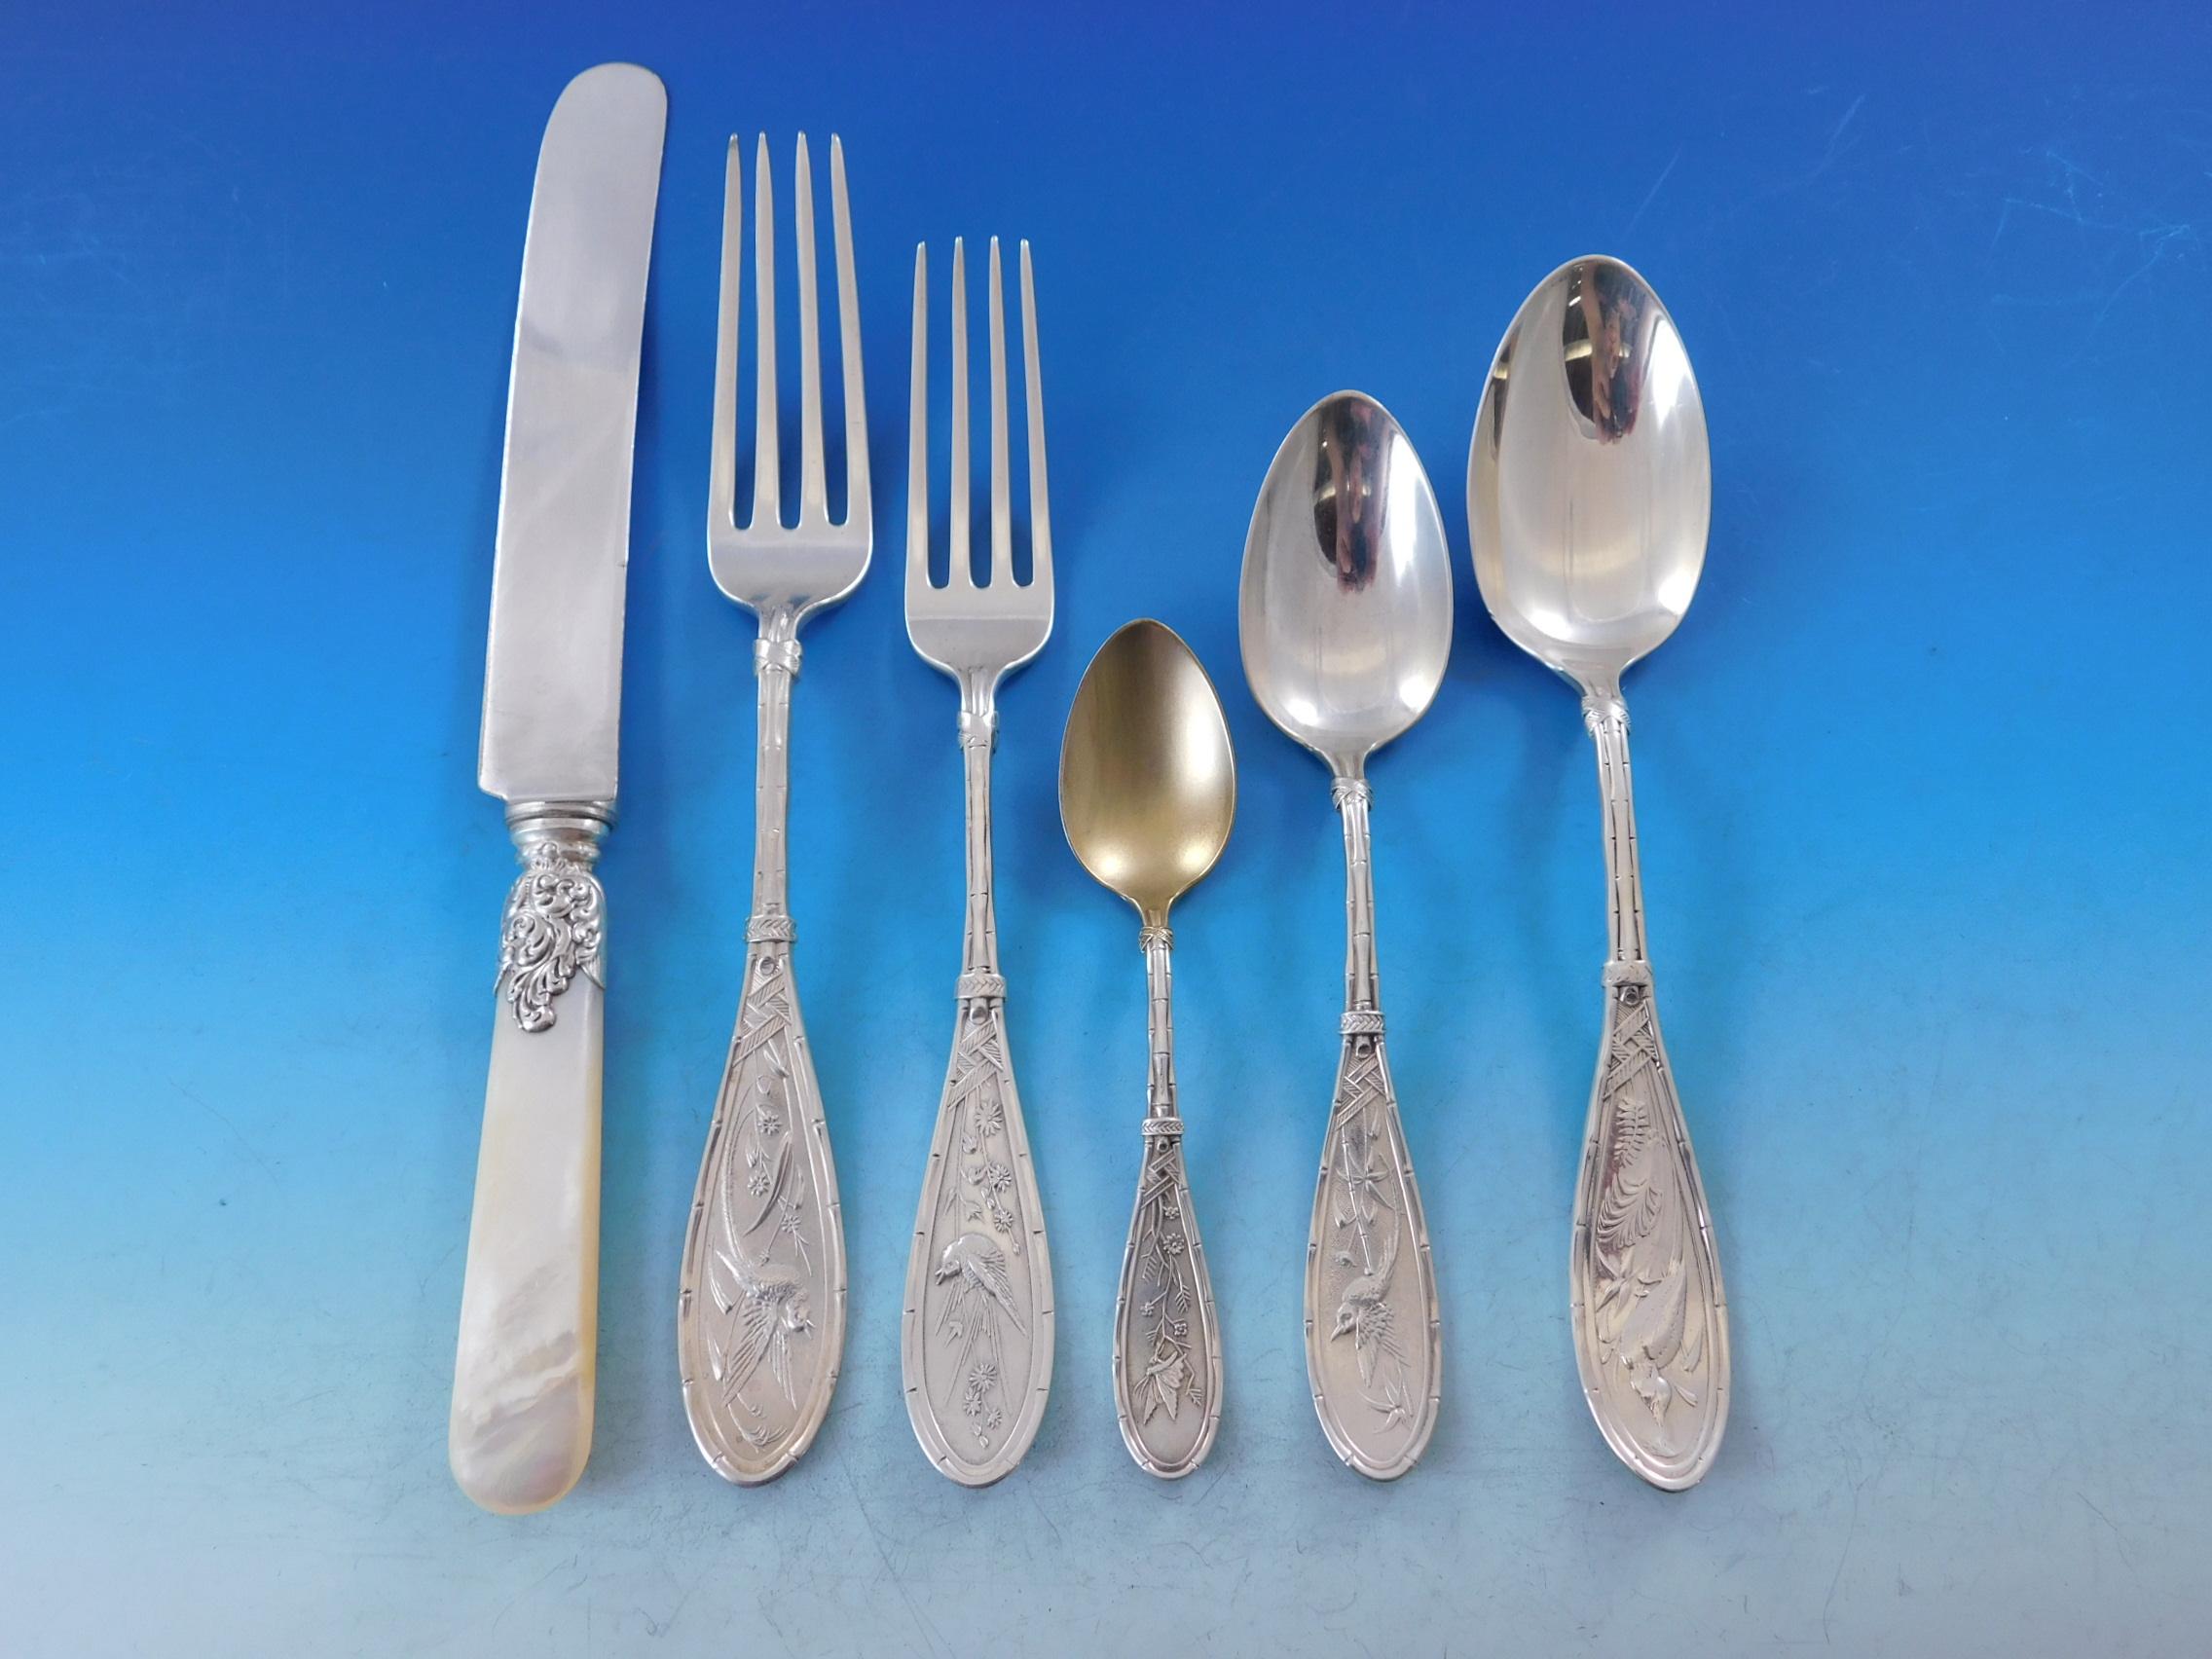 Rare Japanese by Whiting, circa 1874, sterling silver flatware set - 55 pieces (including 8 mother of pearl handle knives). This Japonesque pattern features a multi-motif design depicting realistic birds among a background of grasses, with a bamboo